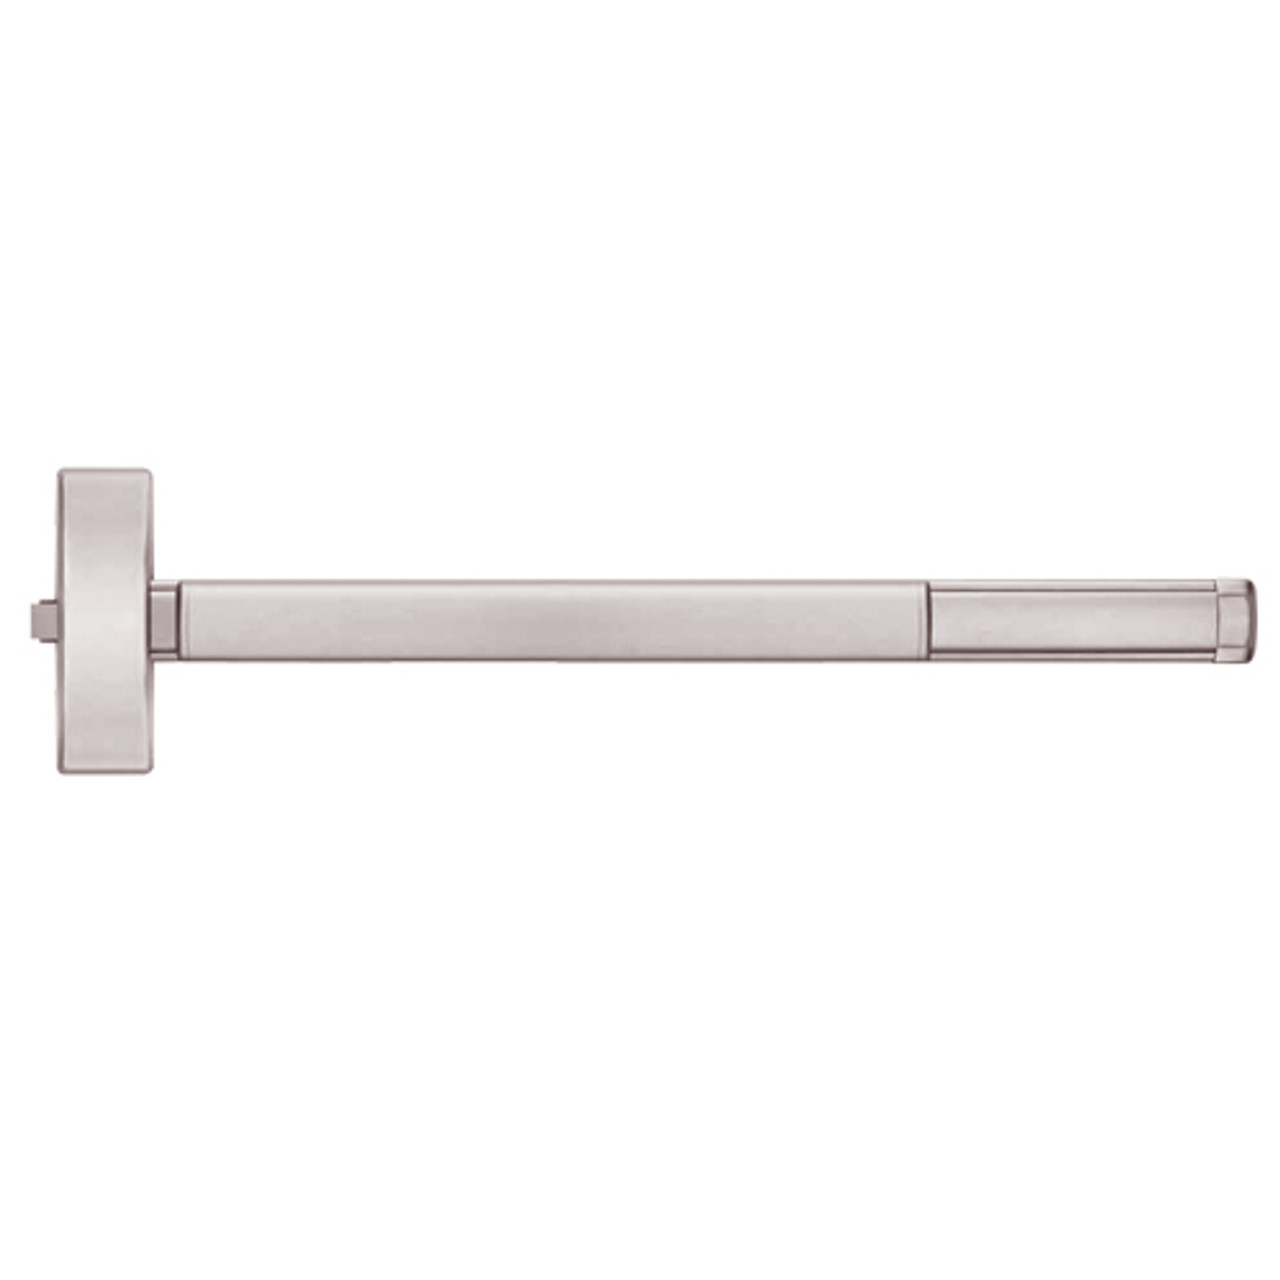 ELR2105-628-36 PHI 2100 Series Non Fire Rated Apex Rim Exit Device with Electric Latch Retraction Prepped for Key Controls Thumb Piece in Satin Aluminum Finish